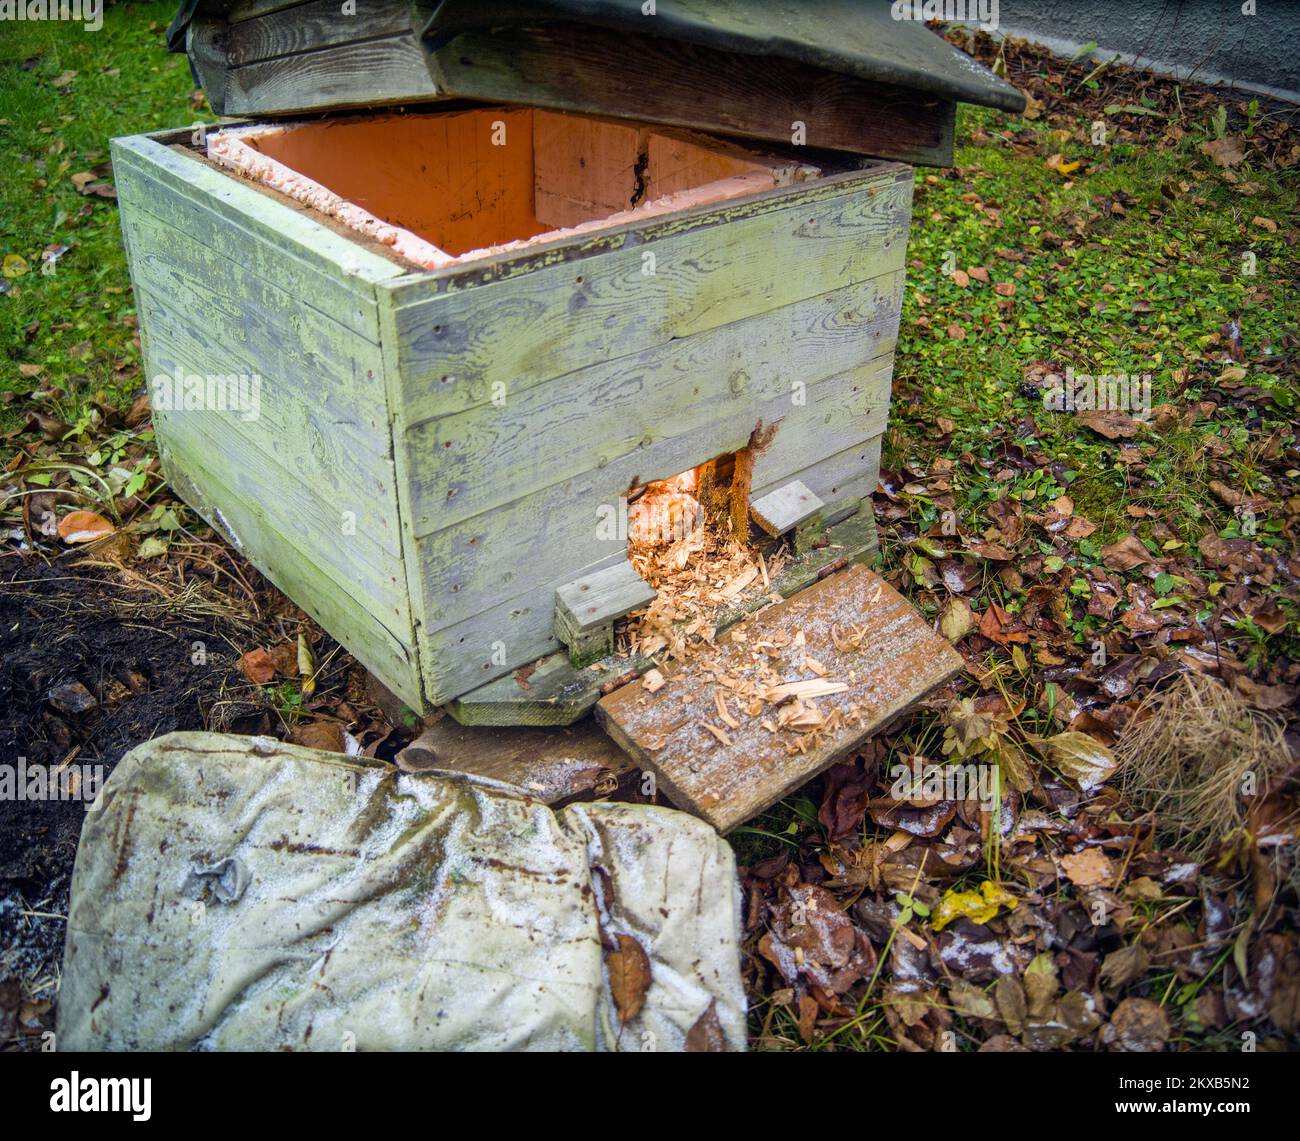 a beehive damaged by mice with wooden chips scattered around, outdoor shot Stock Photo